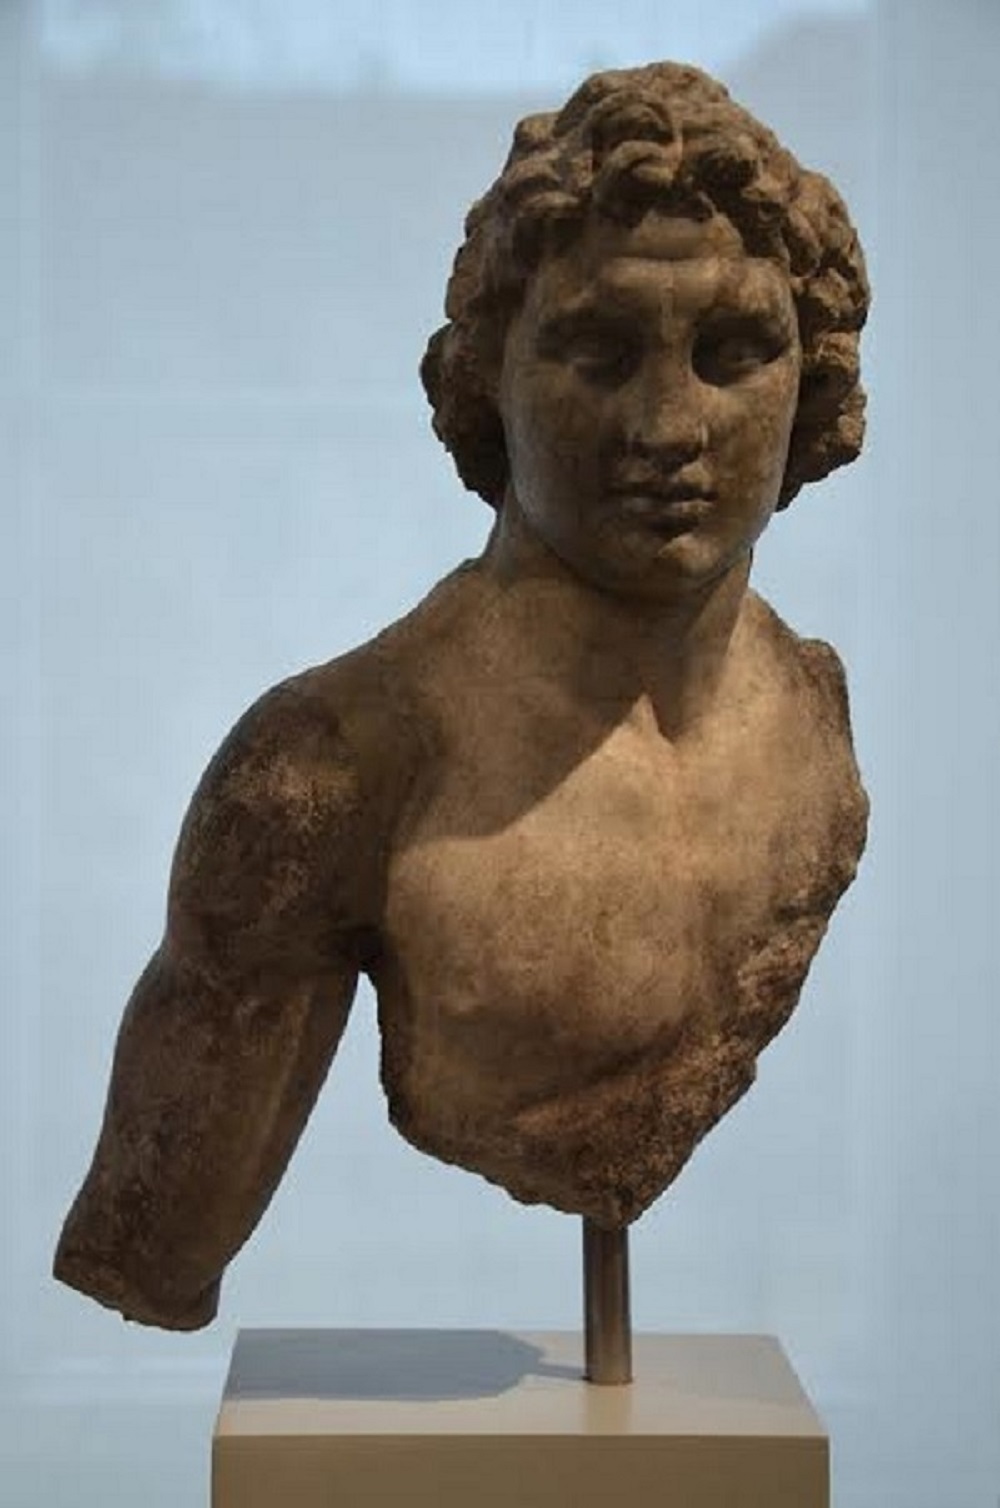 Upper body of a statuette of Alexander the Great, from Priene (Turkey), 200-150 BC, Altes Museum, Berlin